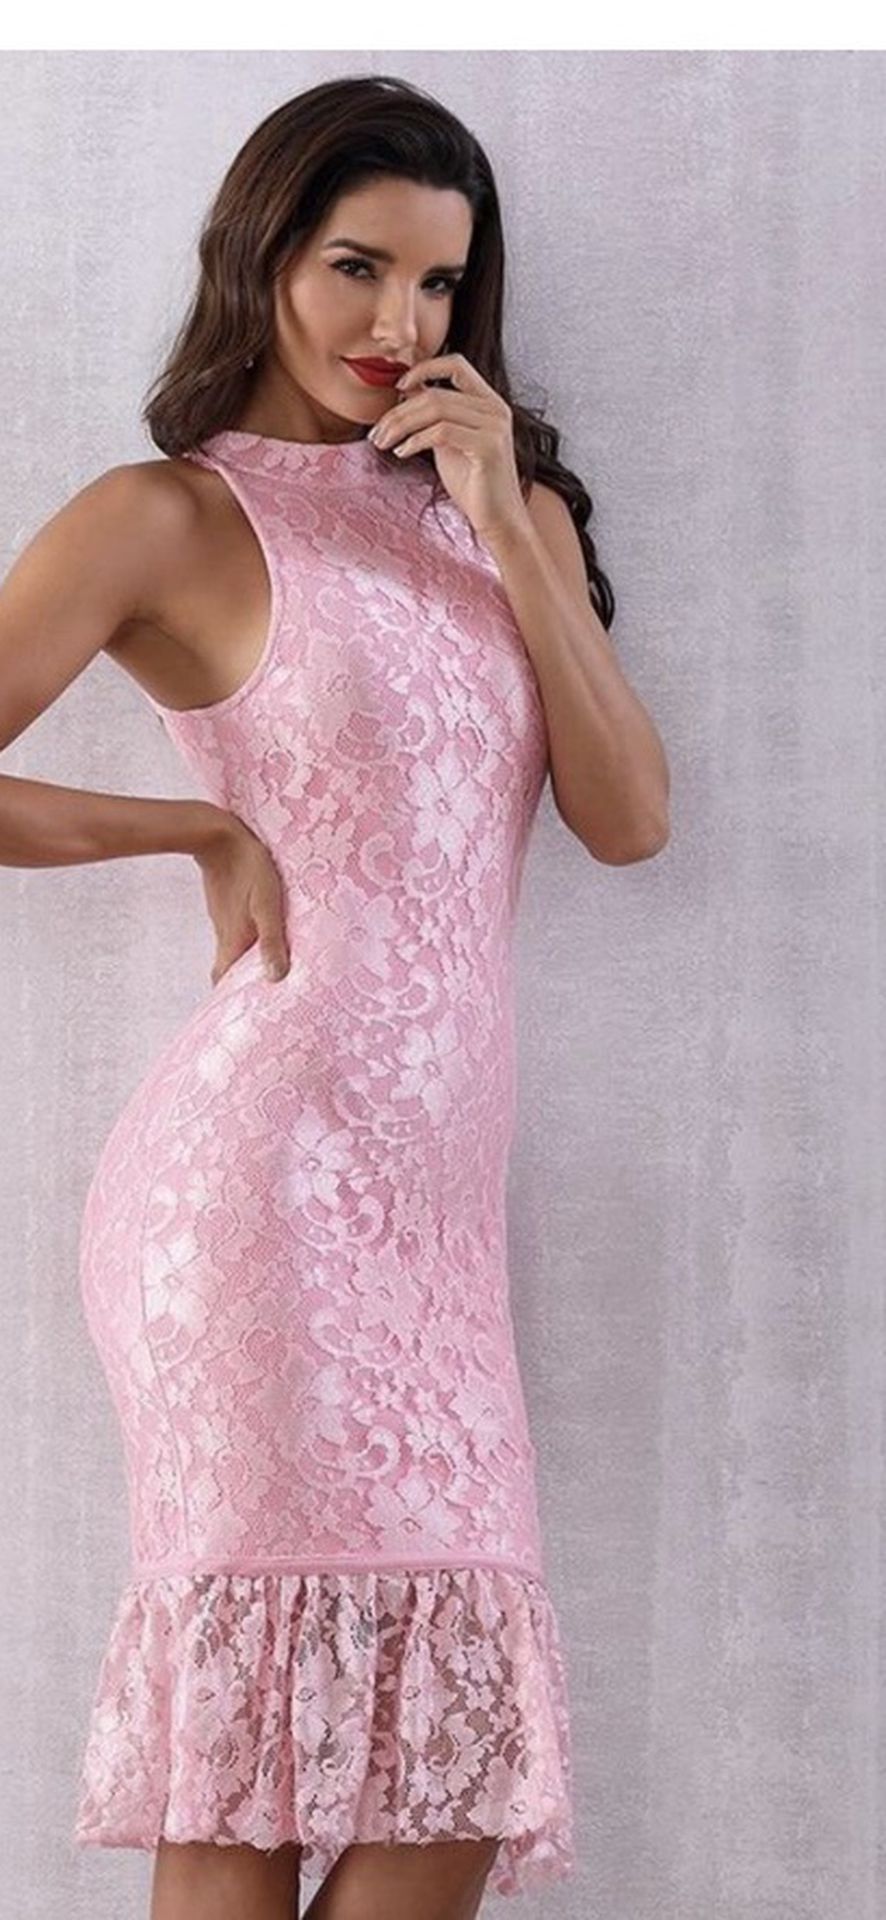 NWOT Sexy Pink Lace Body-con Dress